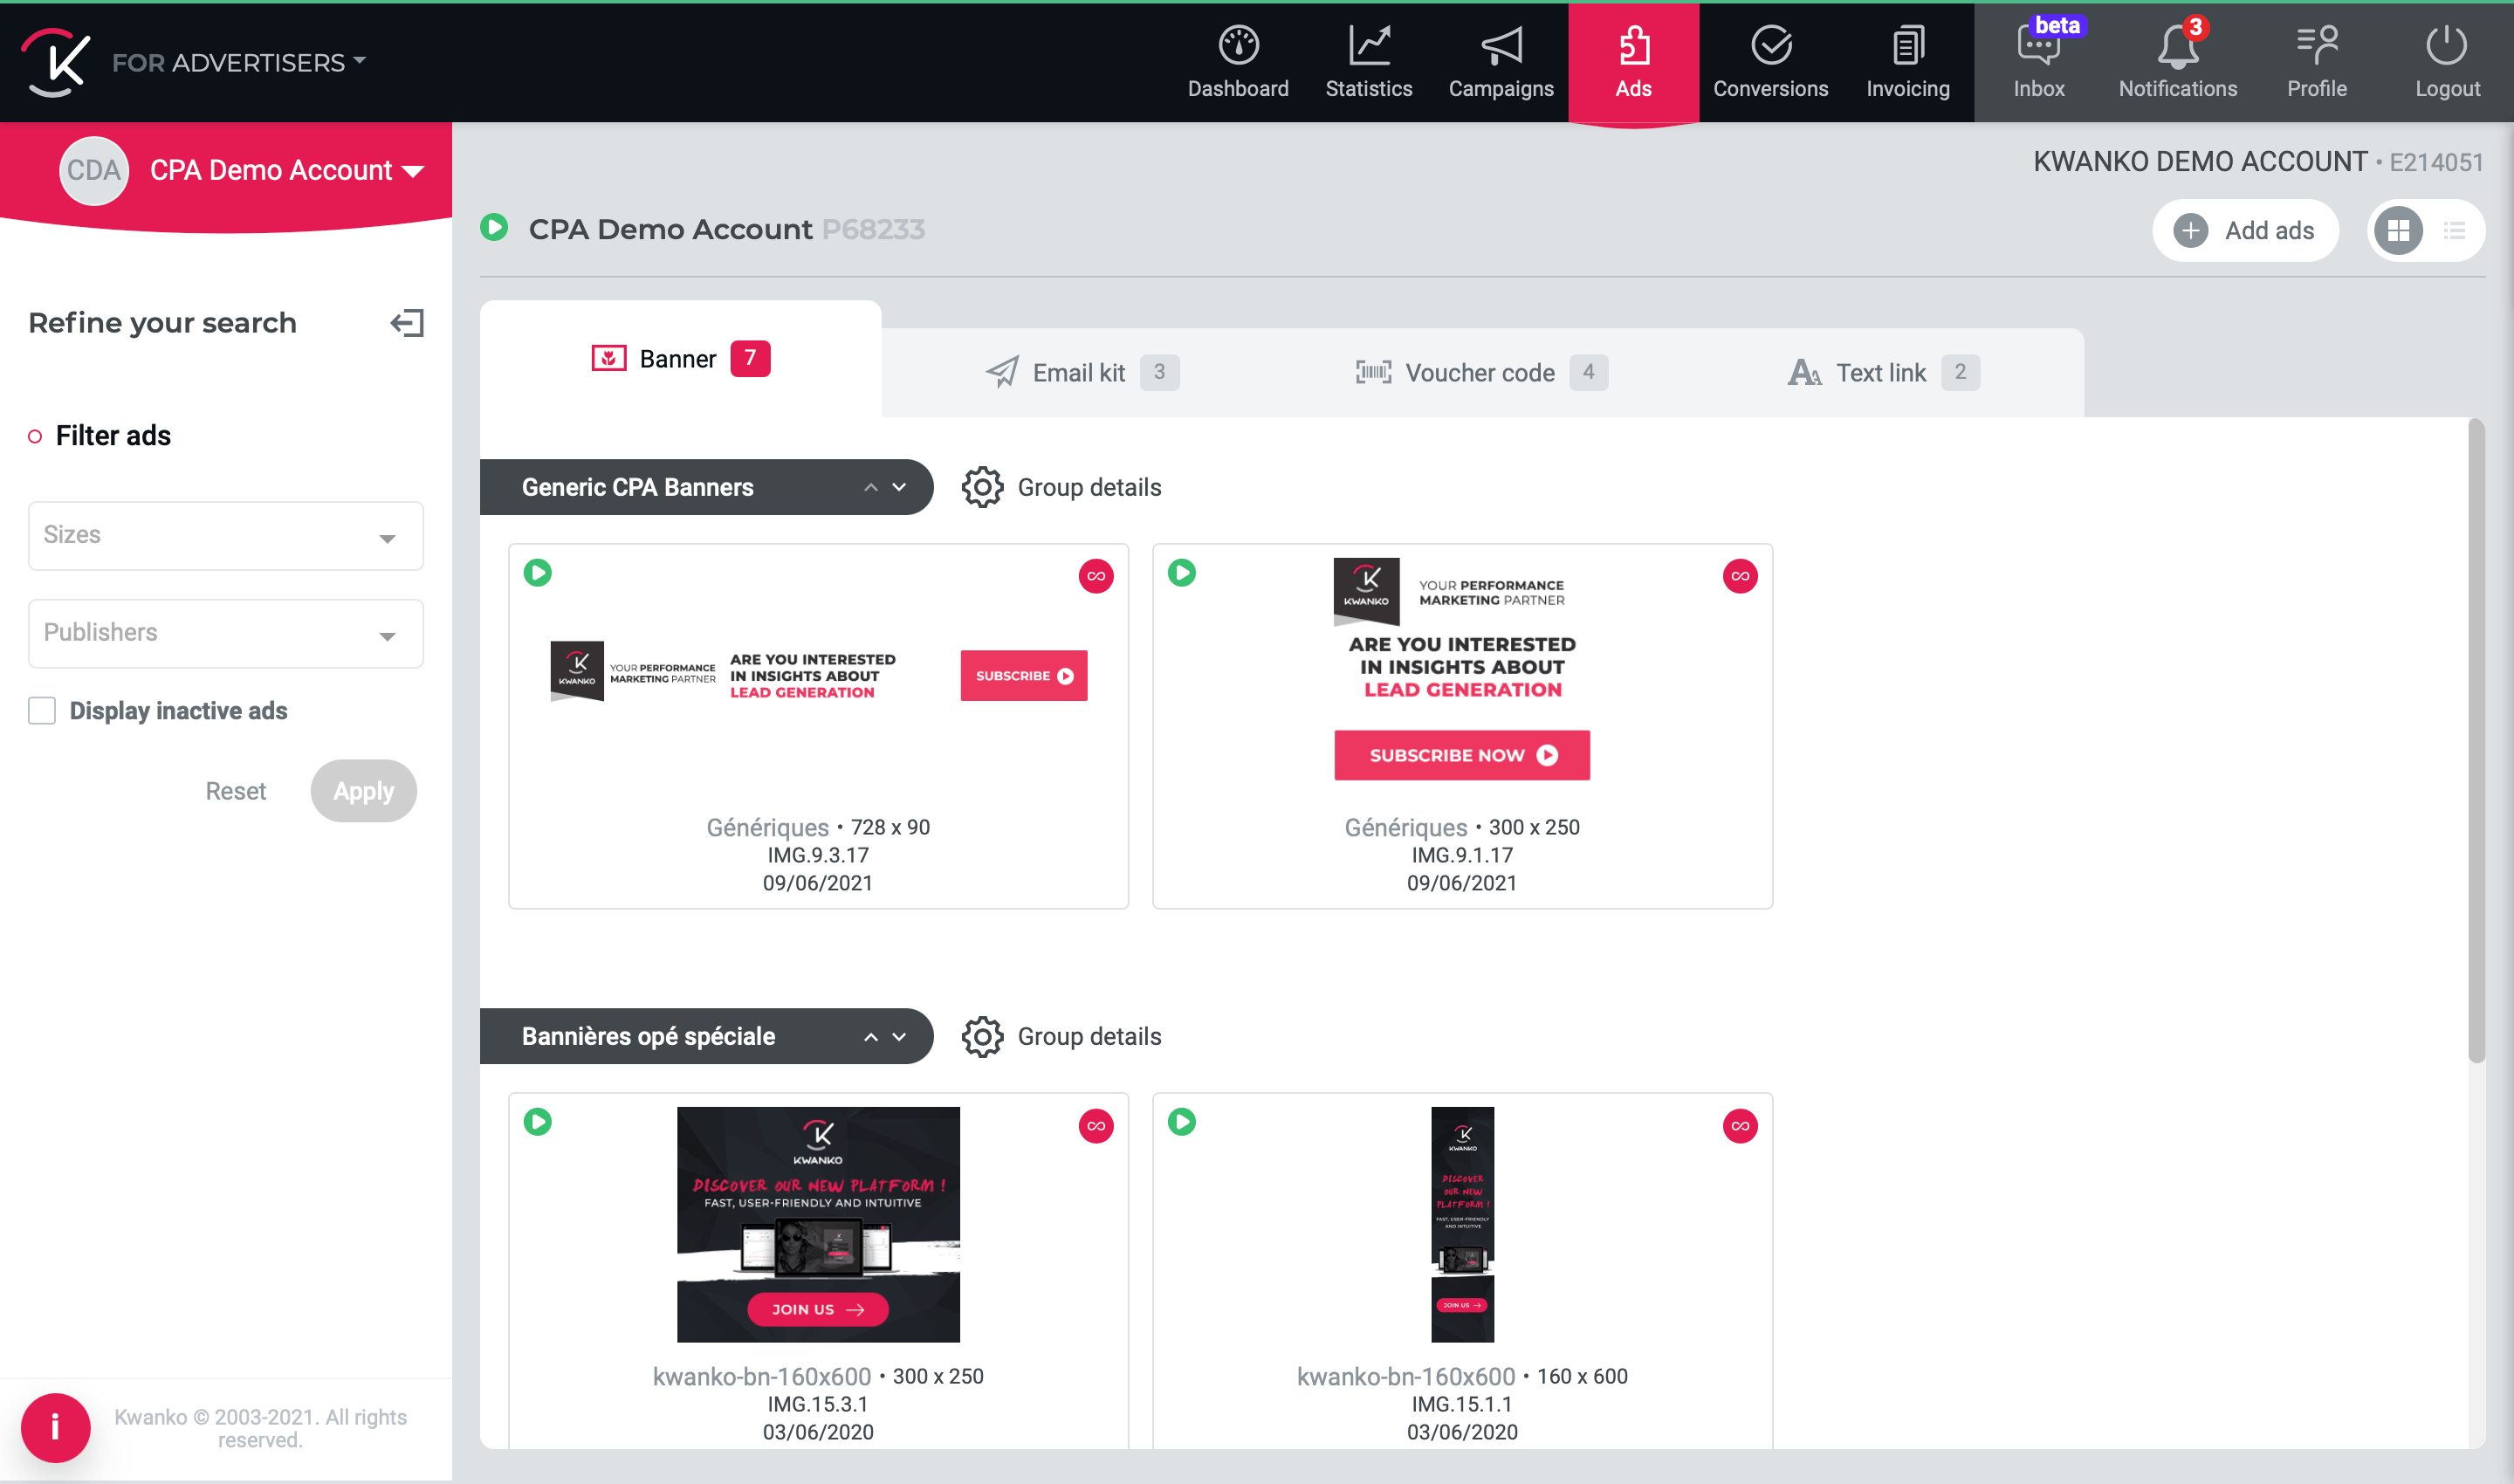 Kwanko - Manage your Performance Marketing Campaigns